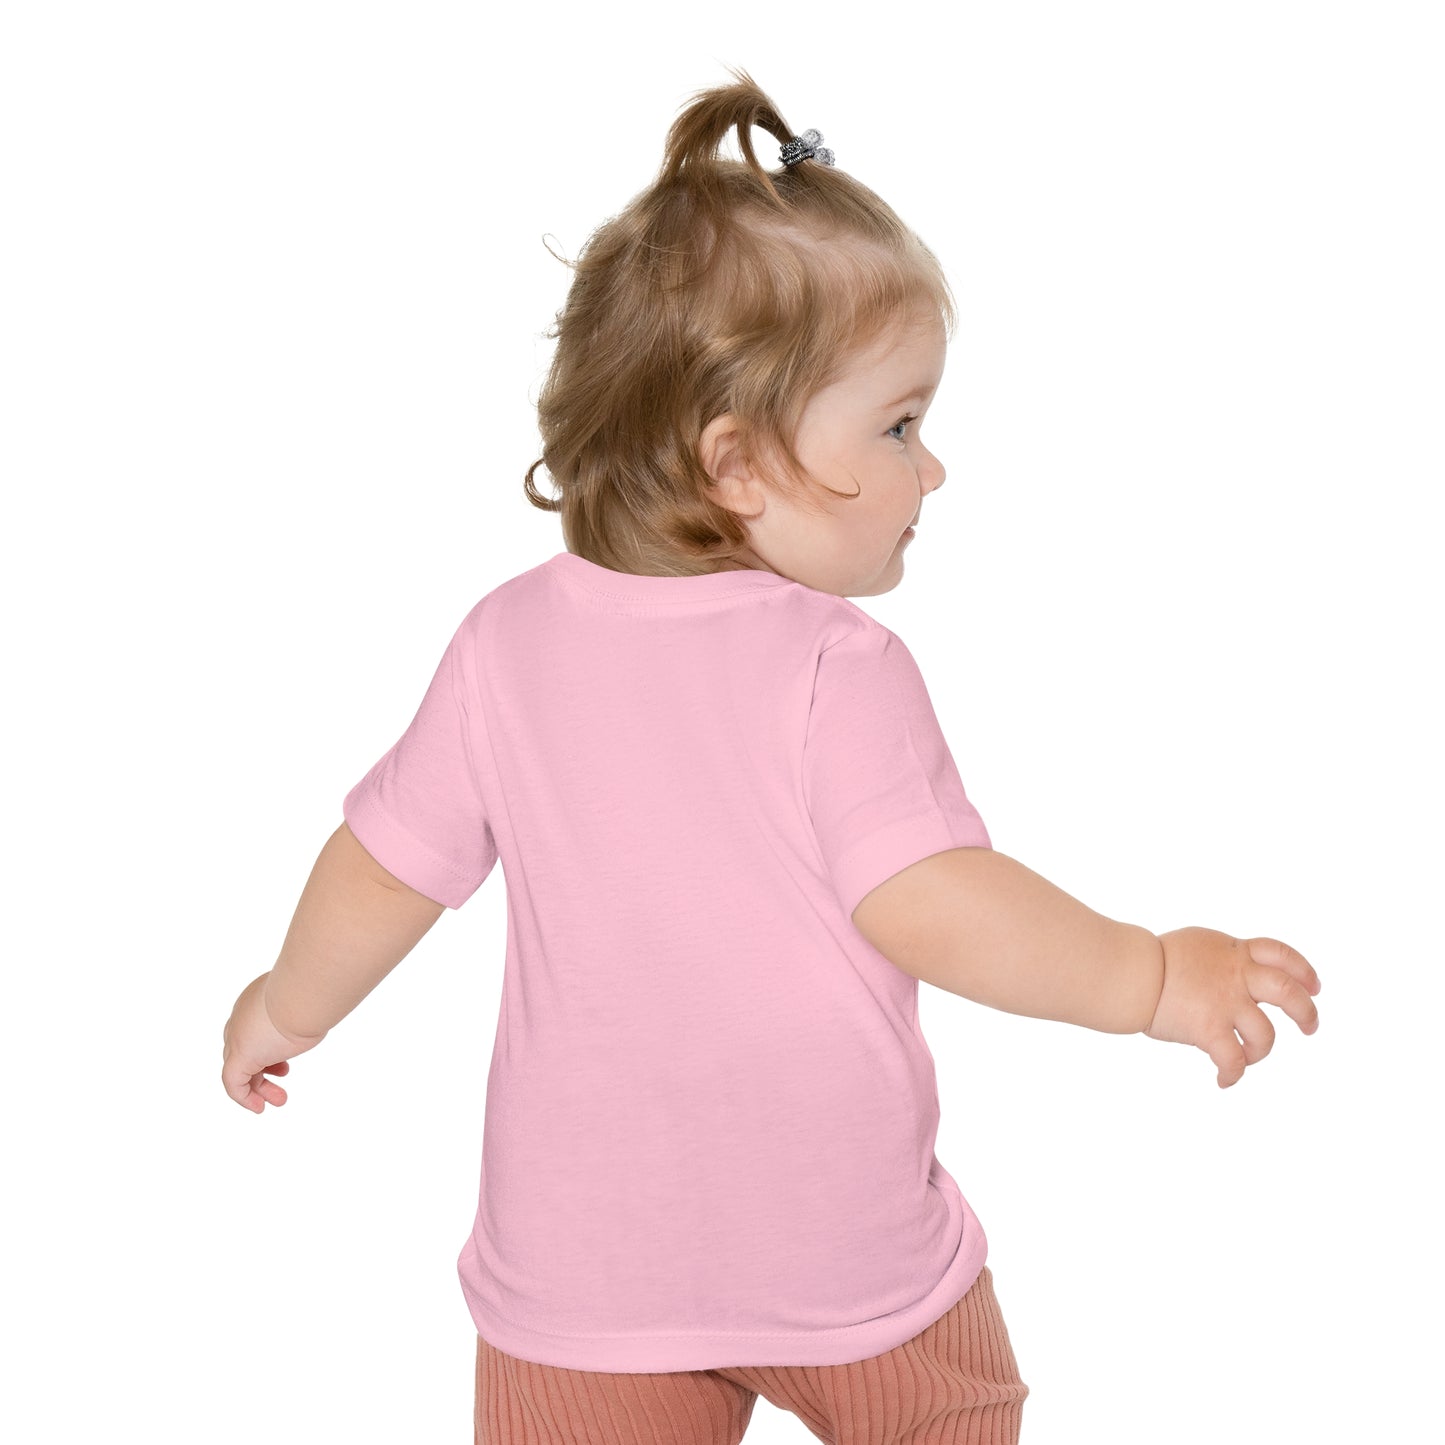 Lazy Bear Outfitters' Baby Tee